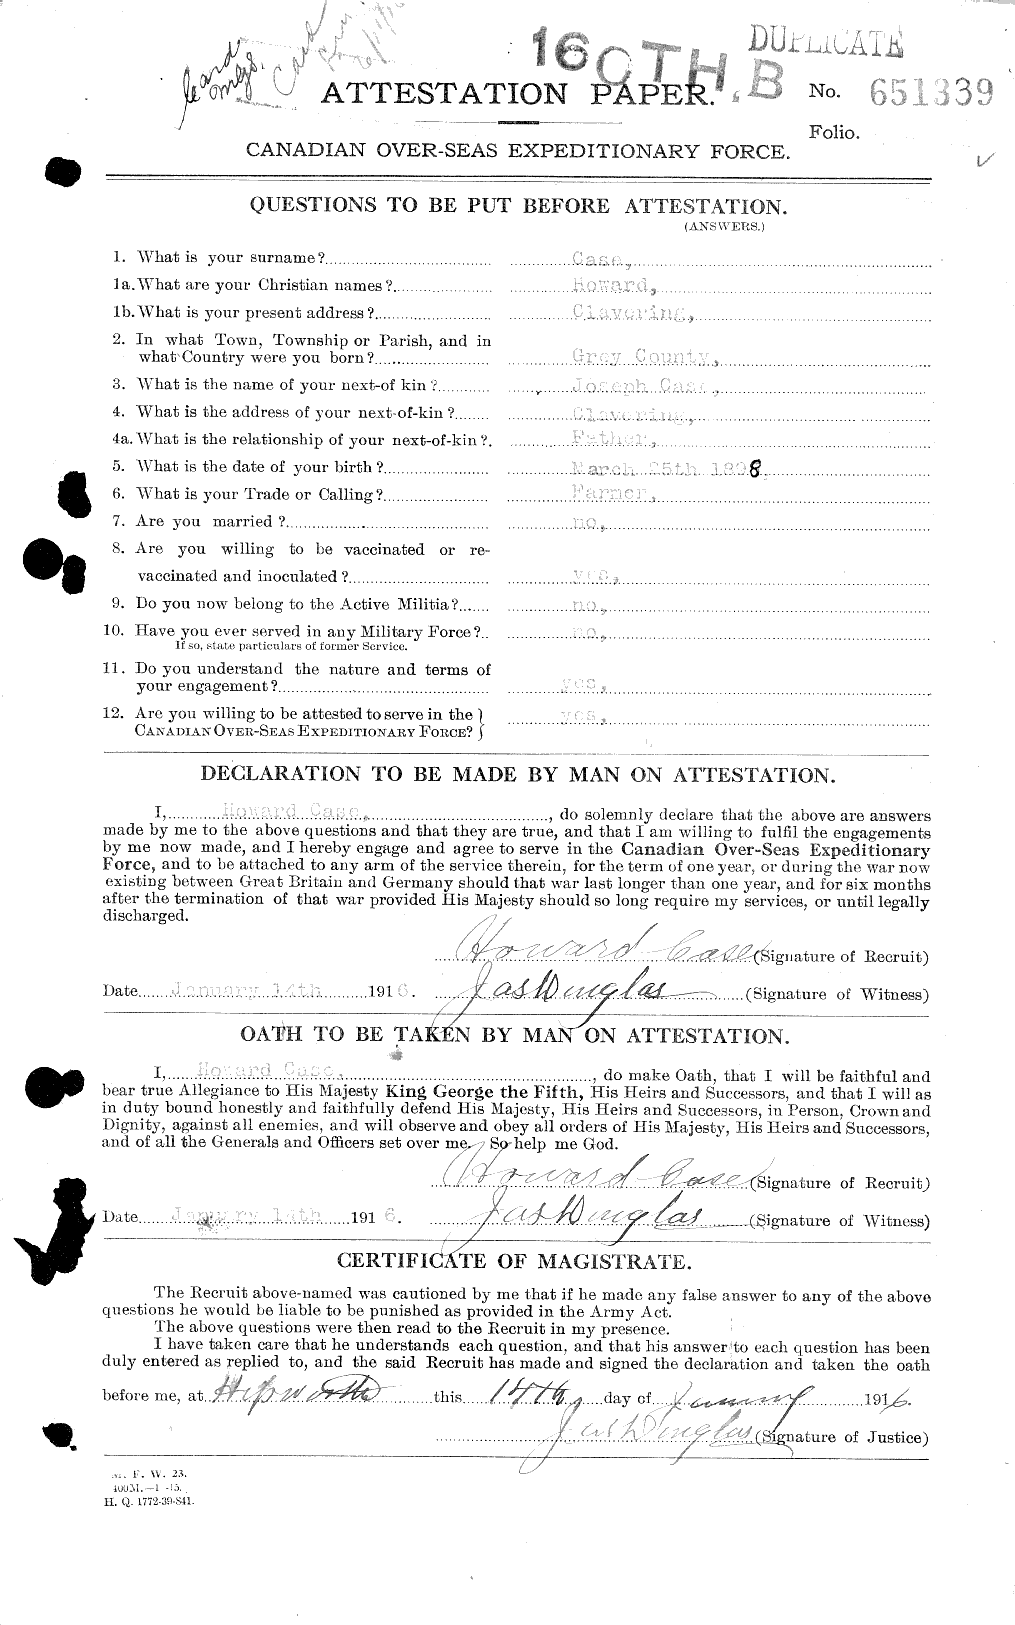 Personnel Records of the First World War - CEF 011714a